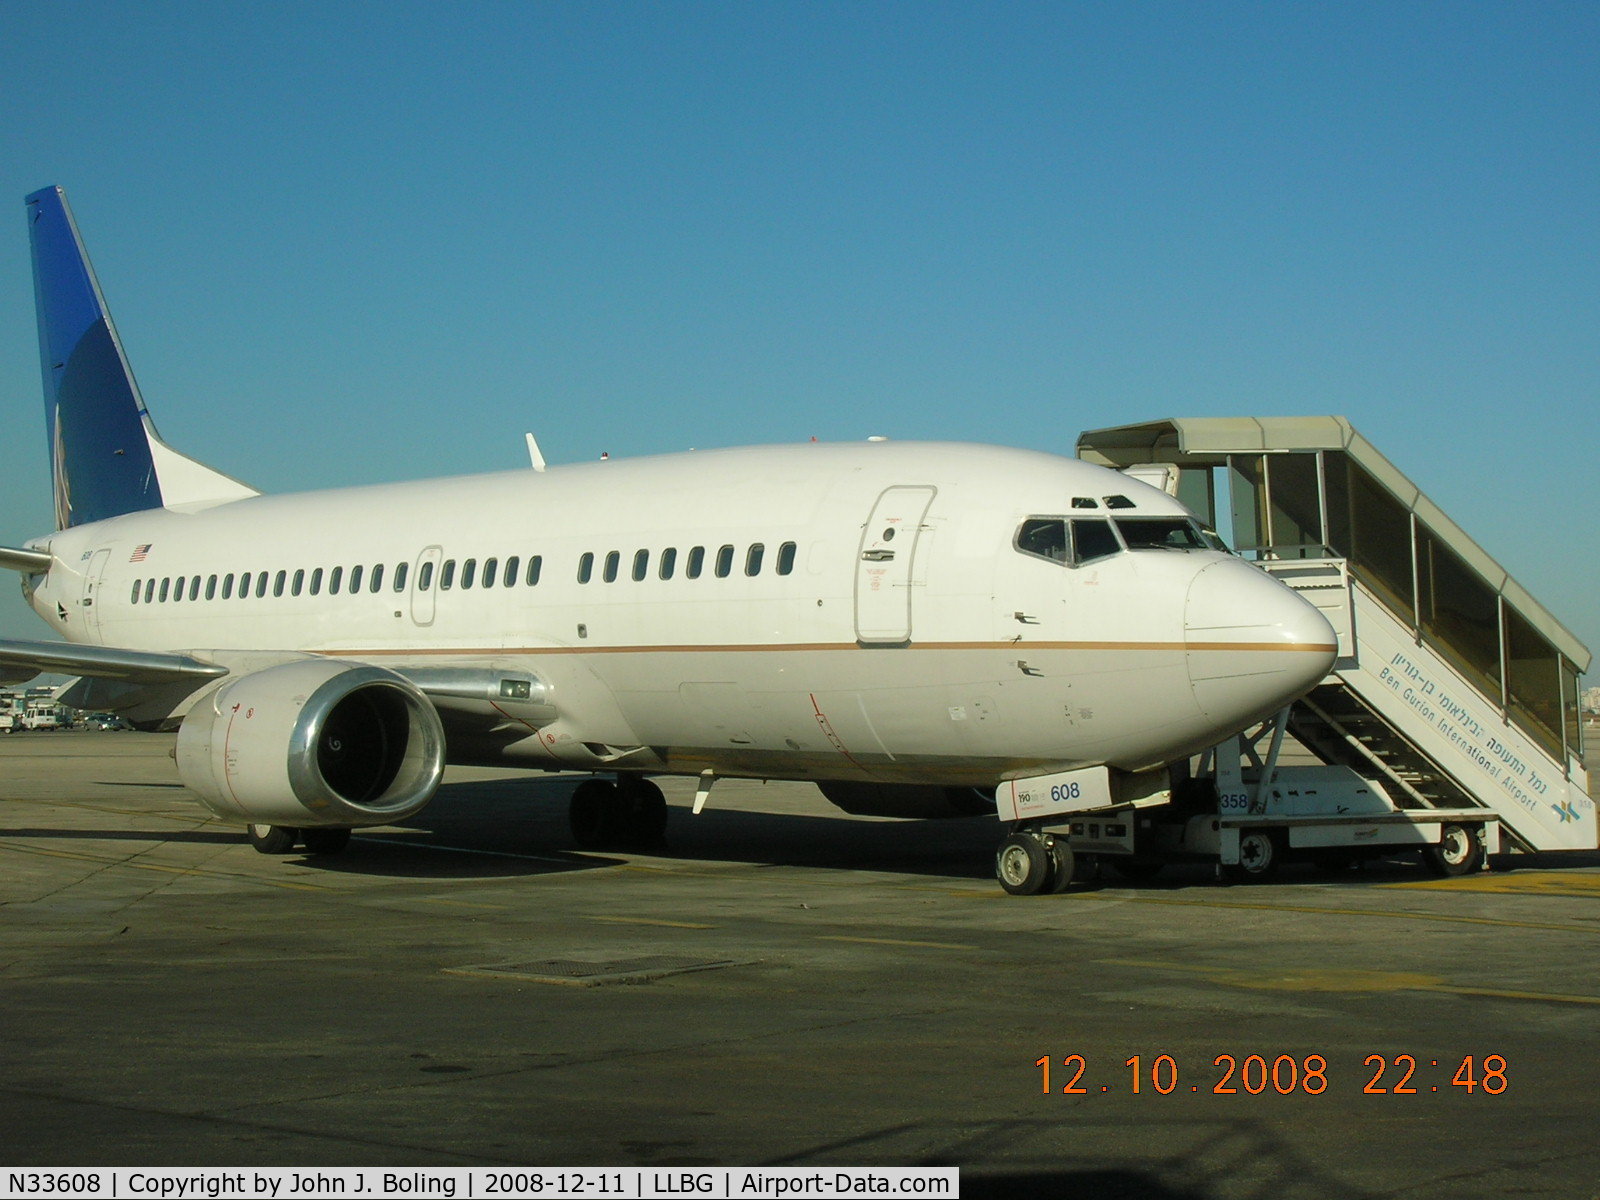 N33608, 1994 Boeing 737-524 C/N 27321, Delivered to Tel Aviv. Will get a C check and new paint then go to a Russian airline. Camera date/time not updated during trip.